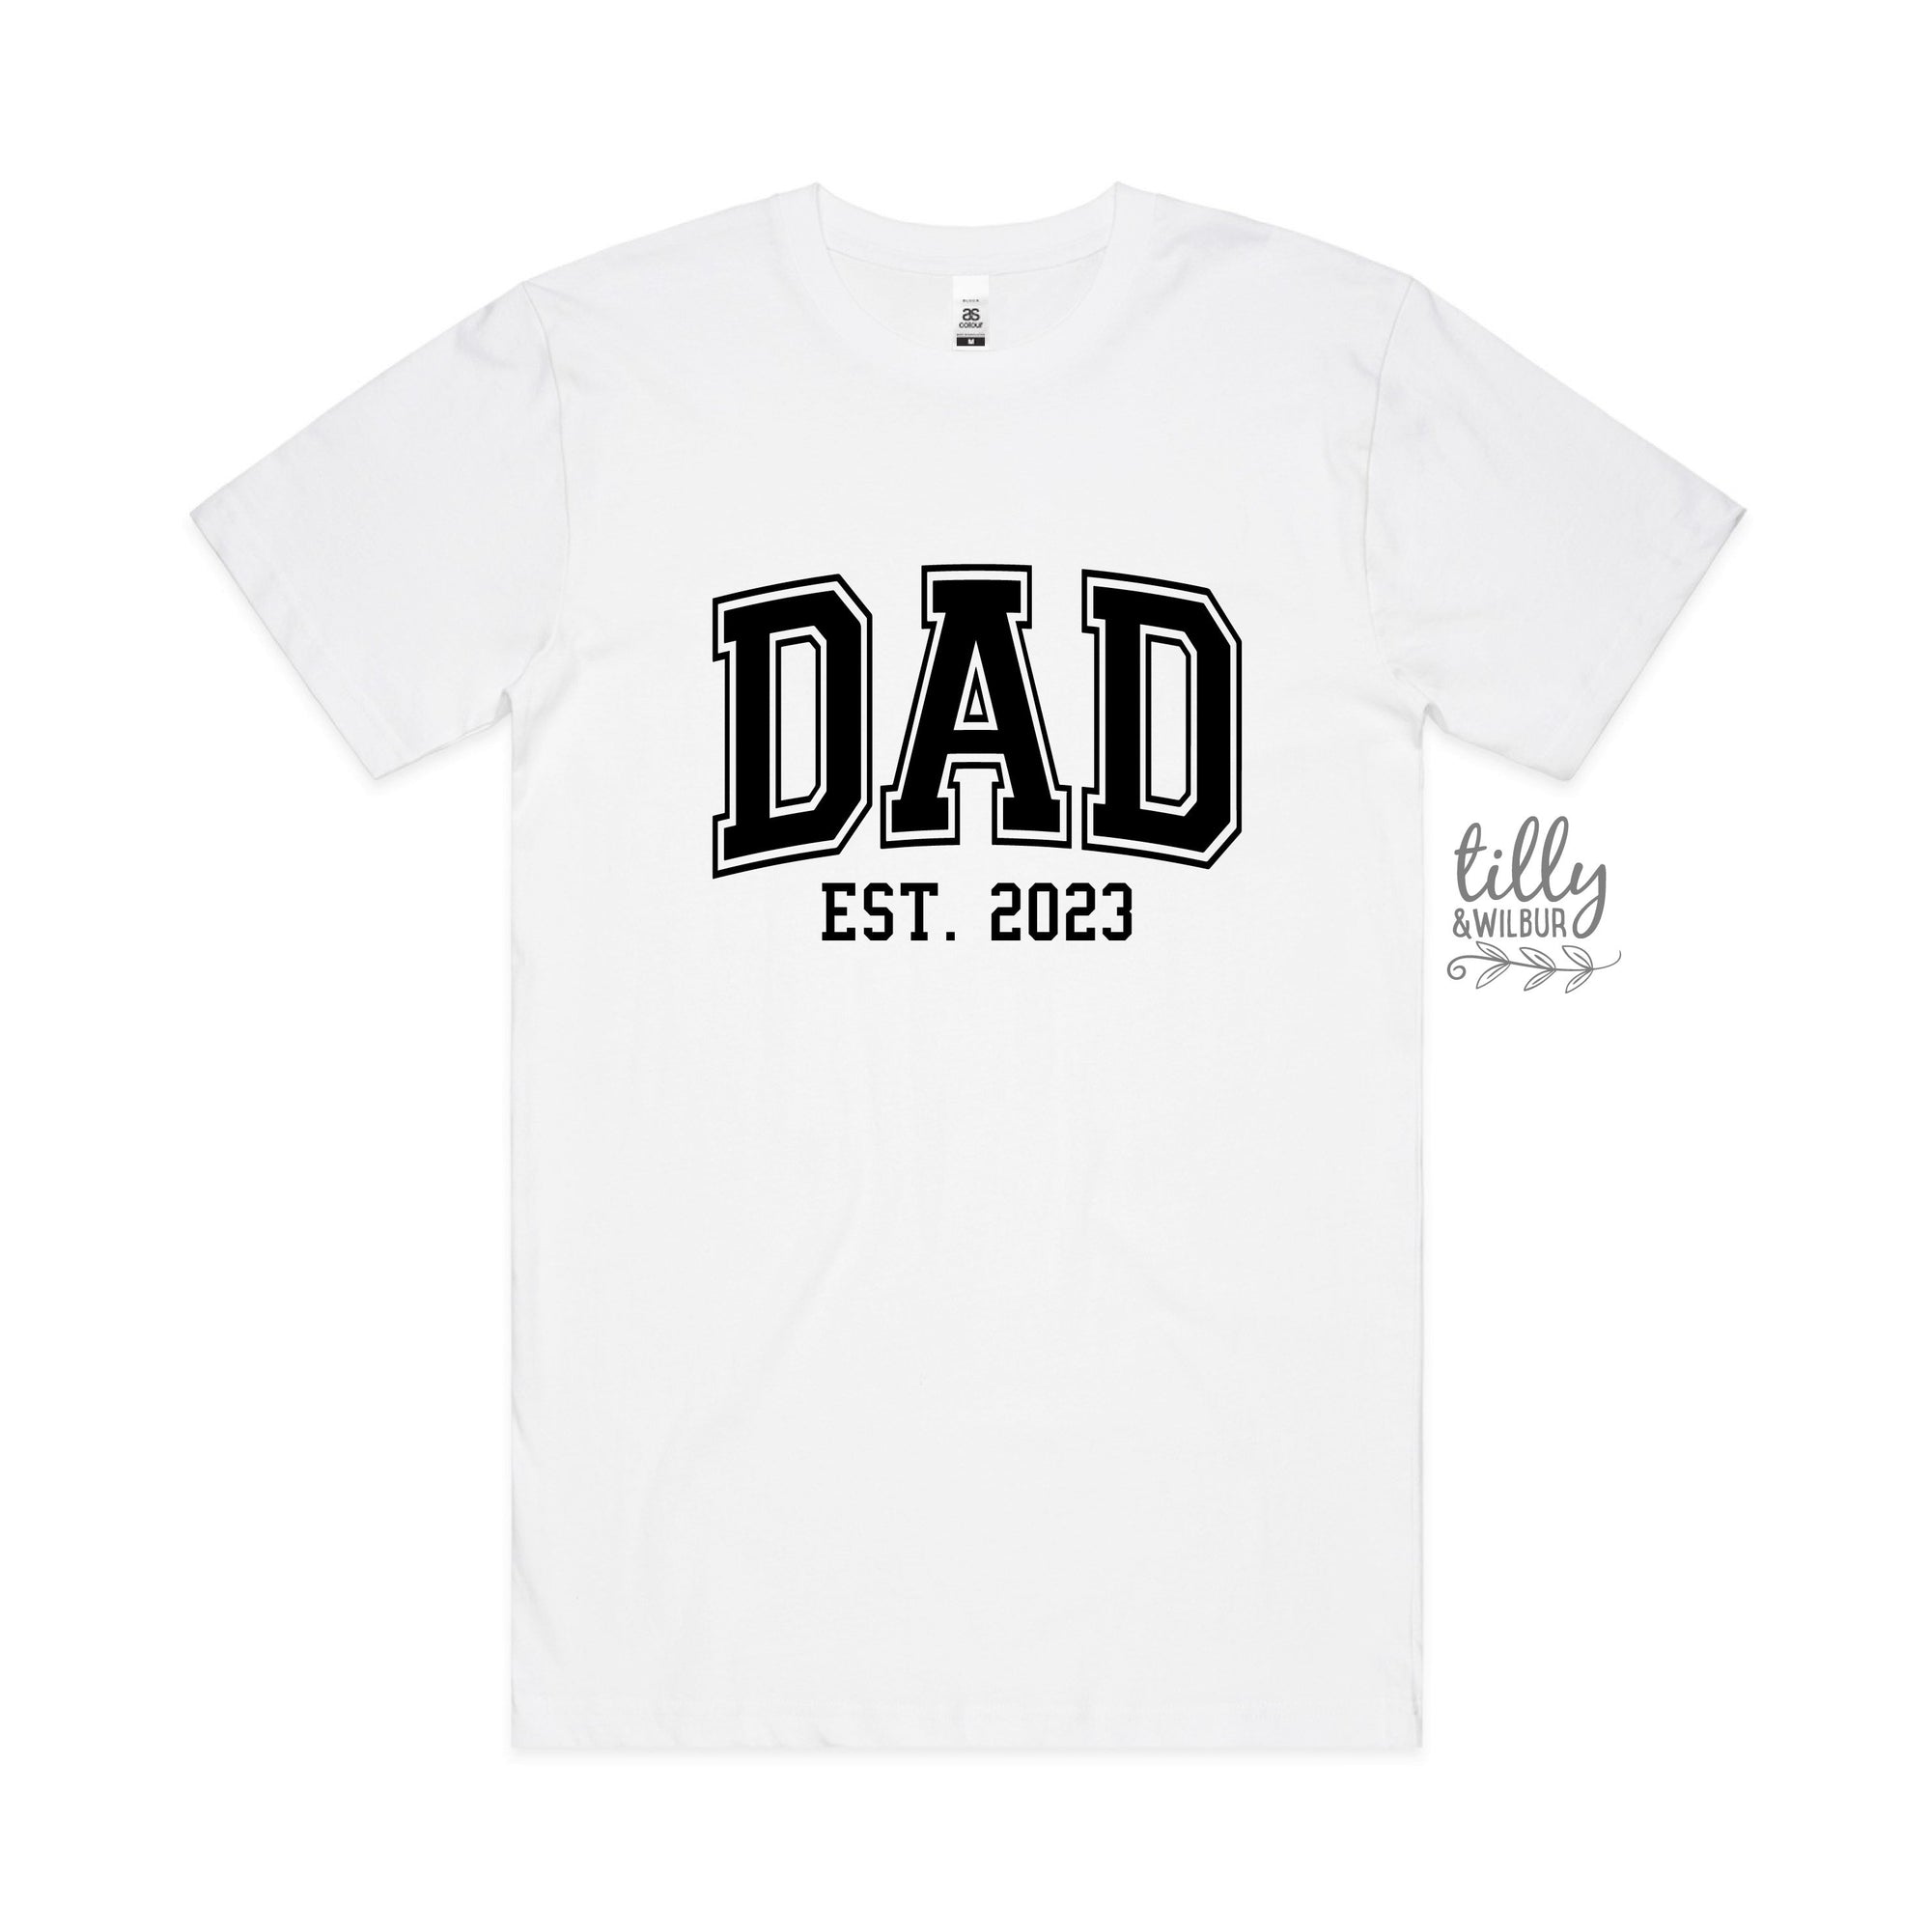 Dad Est T-Shirt, Gift For Dad, Father's Day T-Shirt, Funny Dad T-Shirt, New Dad T-Shirt, Baby Shower Gift, Birthday Gift, Christmas Gift